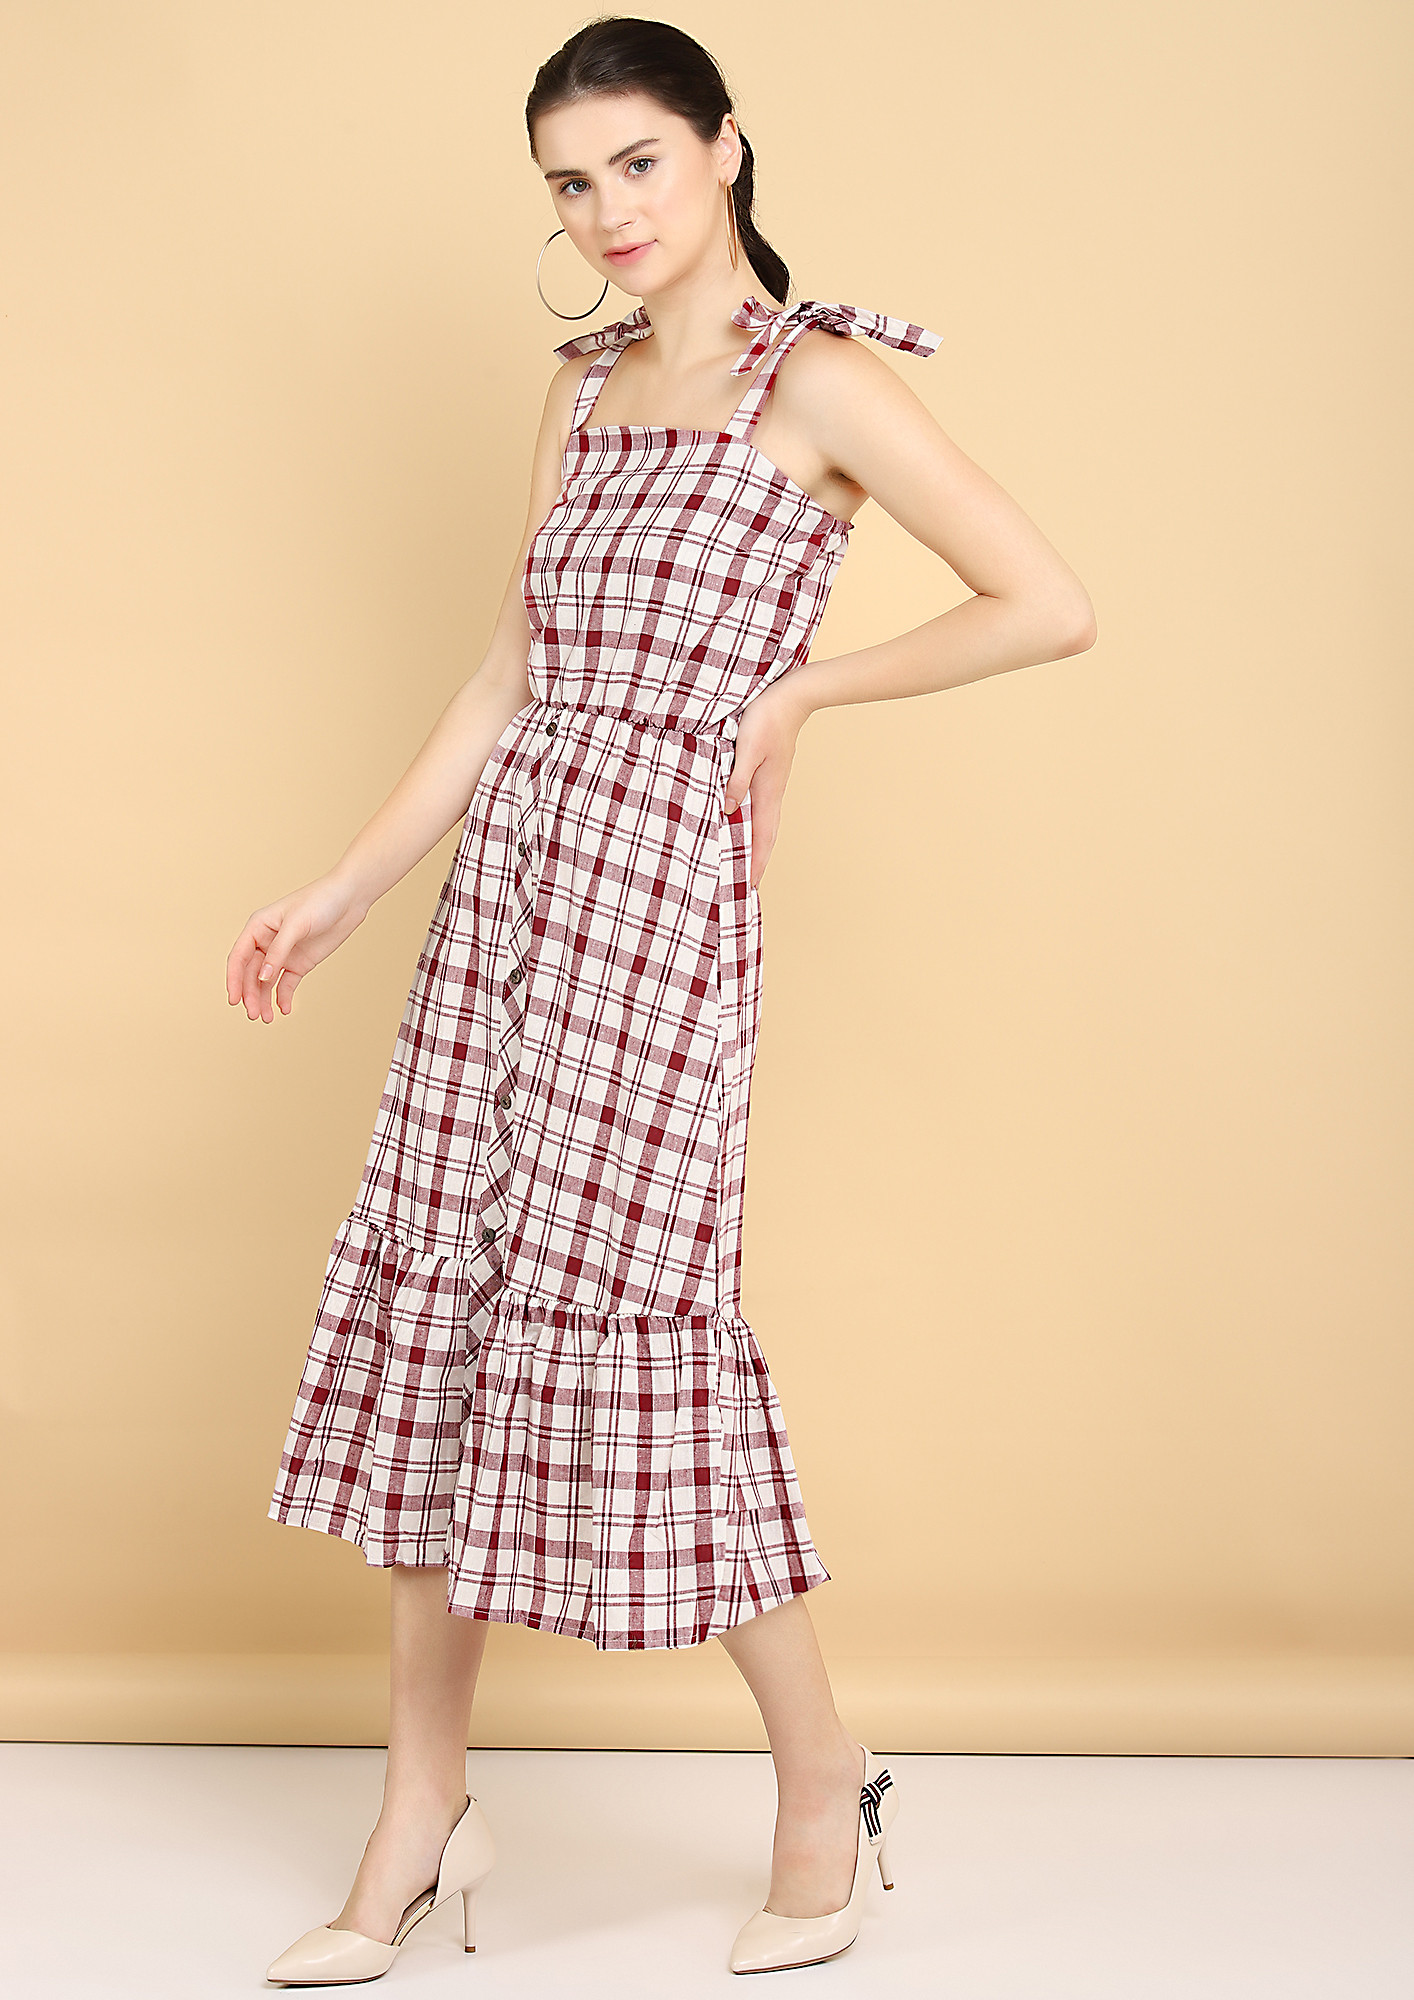 ALL CHEQUERED GAL RED WHITE MIDI DRESS